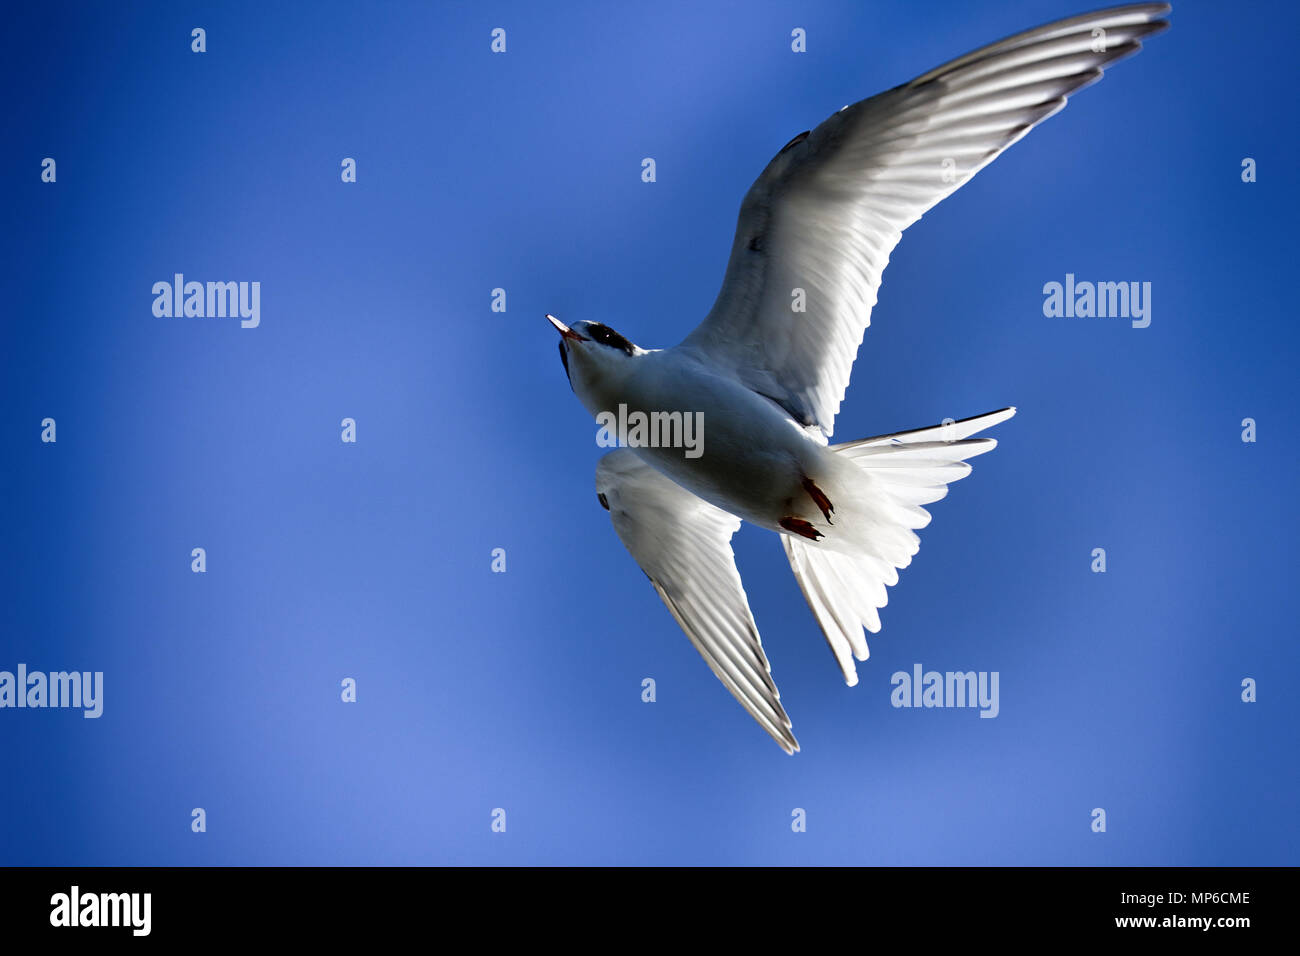 Young river tern (Common Tern, scray, Sterna hirundo) flying, hangs in place like white butterfly. Beauty of flight of birds Stock Photo